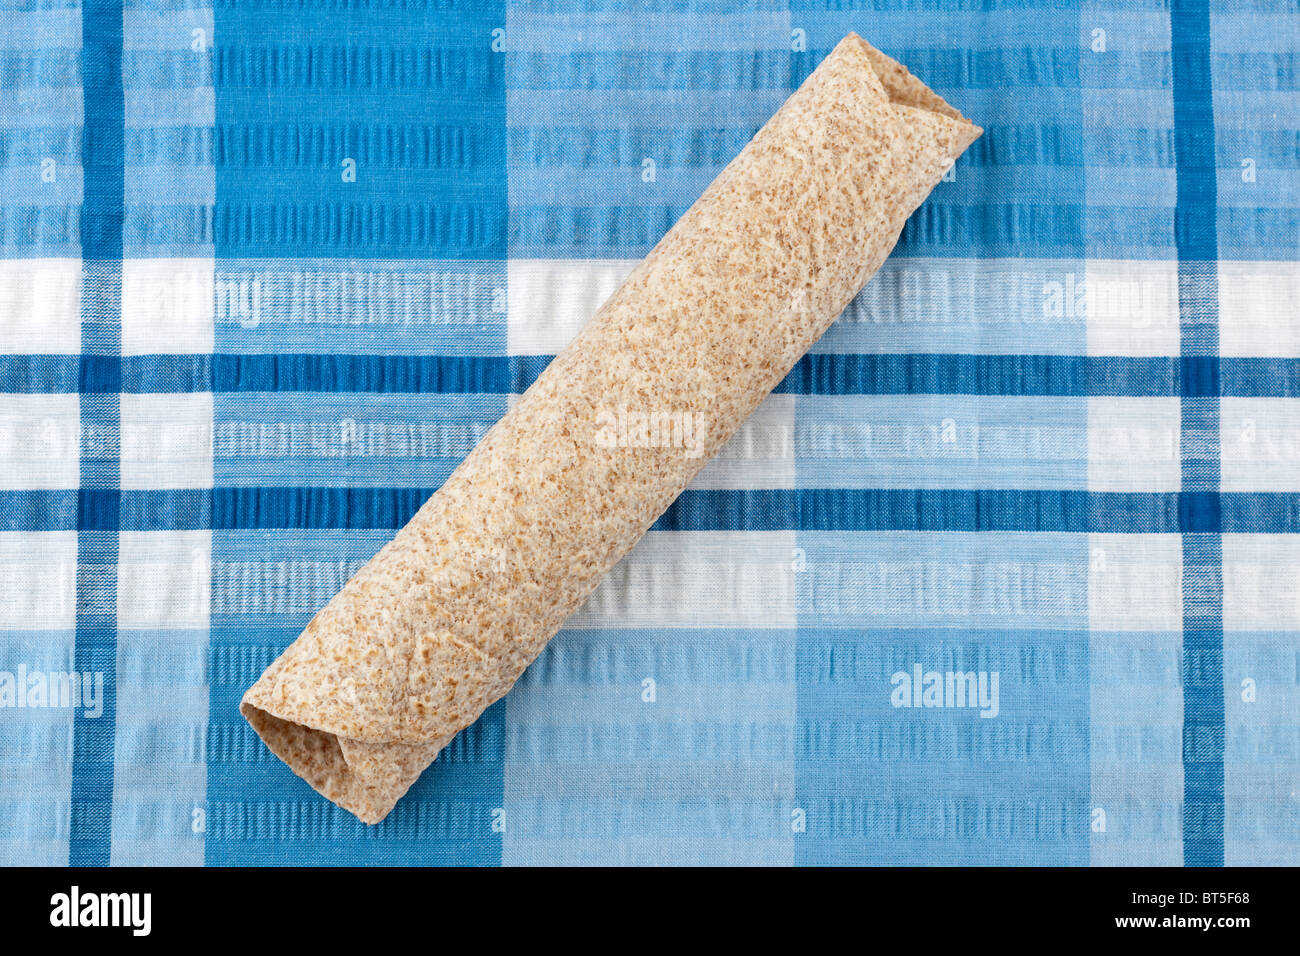 Rolled up wholemeal fajitas wrapbread for sandwiches Stock Photo